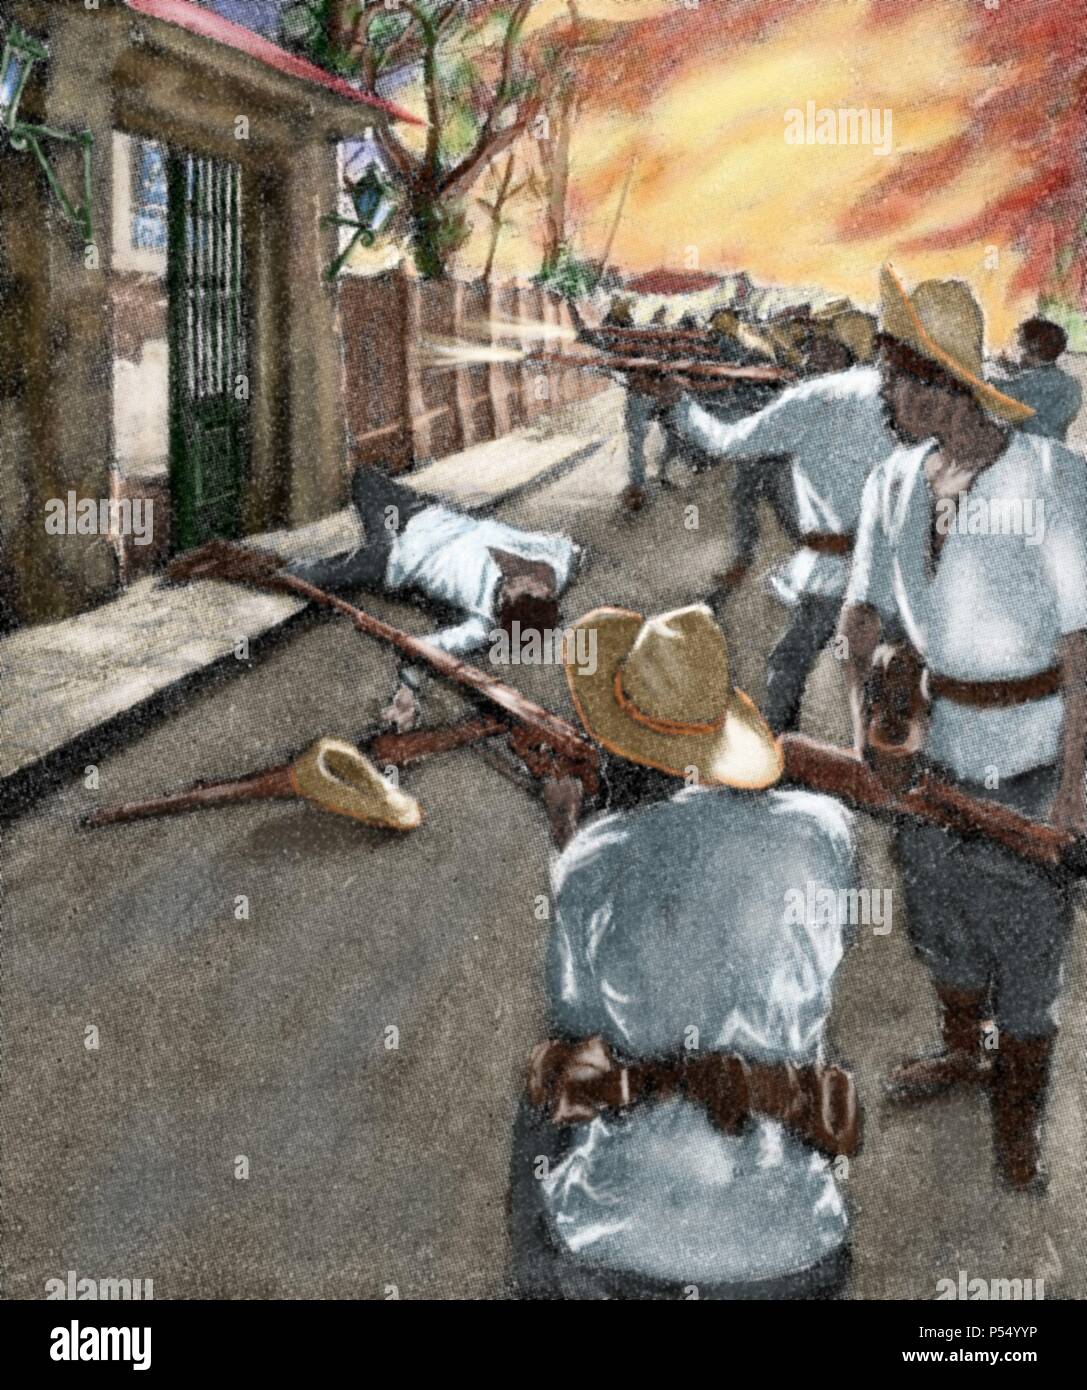 Philippine War of Independence. Manila. Insurgent attack on the barracks of Co. C, 13th Minnesota Volunteers, during the Tondo Fire. Engraving of 'The Artistic Illustration,' 1899. Colored. Stock Photo